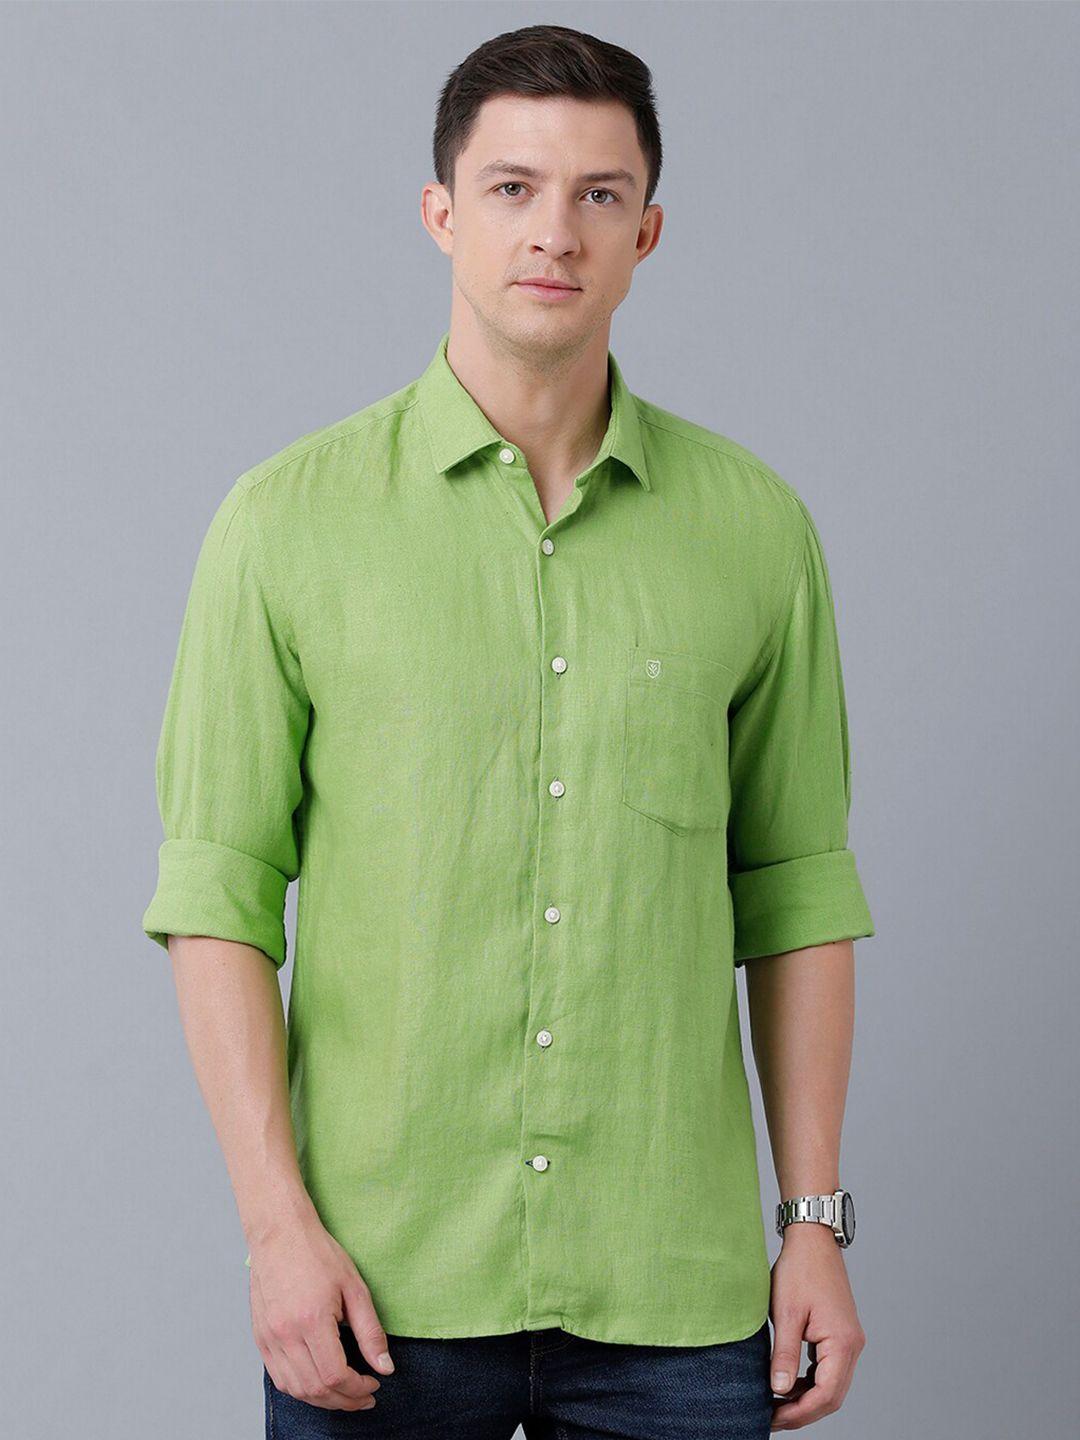 linen-club-men-solid-sustainable-casual-pure-linen-shirt